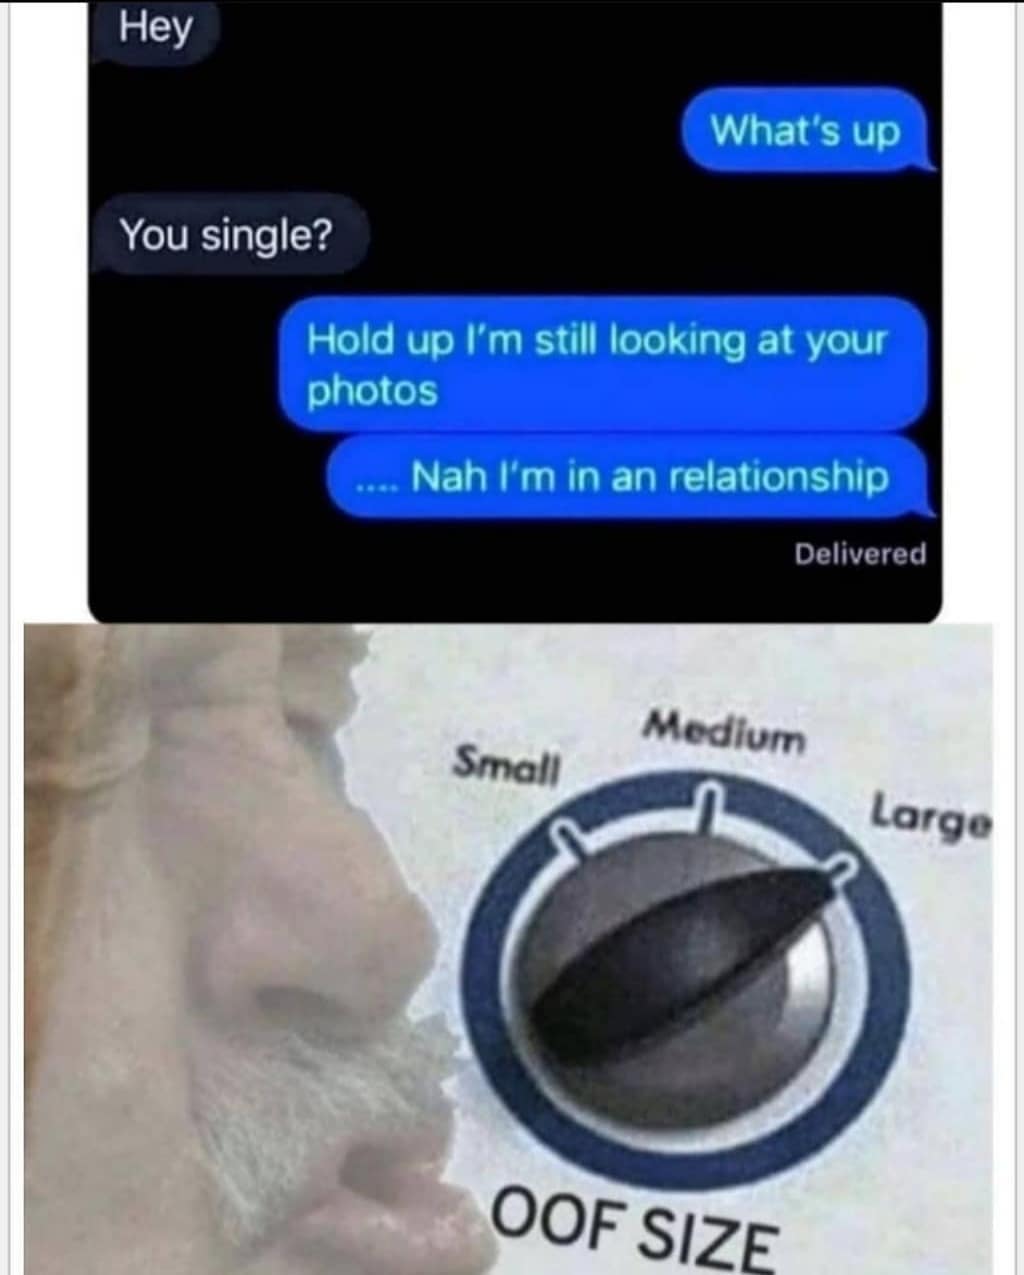 oof size large meme - Hey What's up You single? Hold up I'm still looking at your photos .... Nah I'm in an relationship Delivered Medium Small Large Oof Size